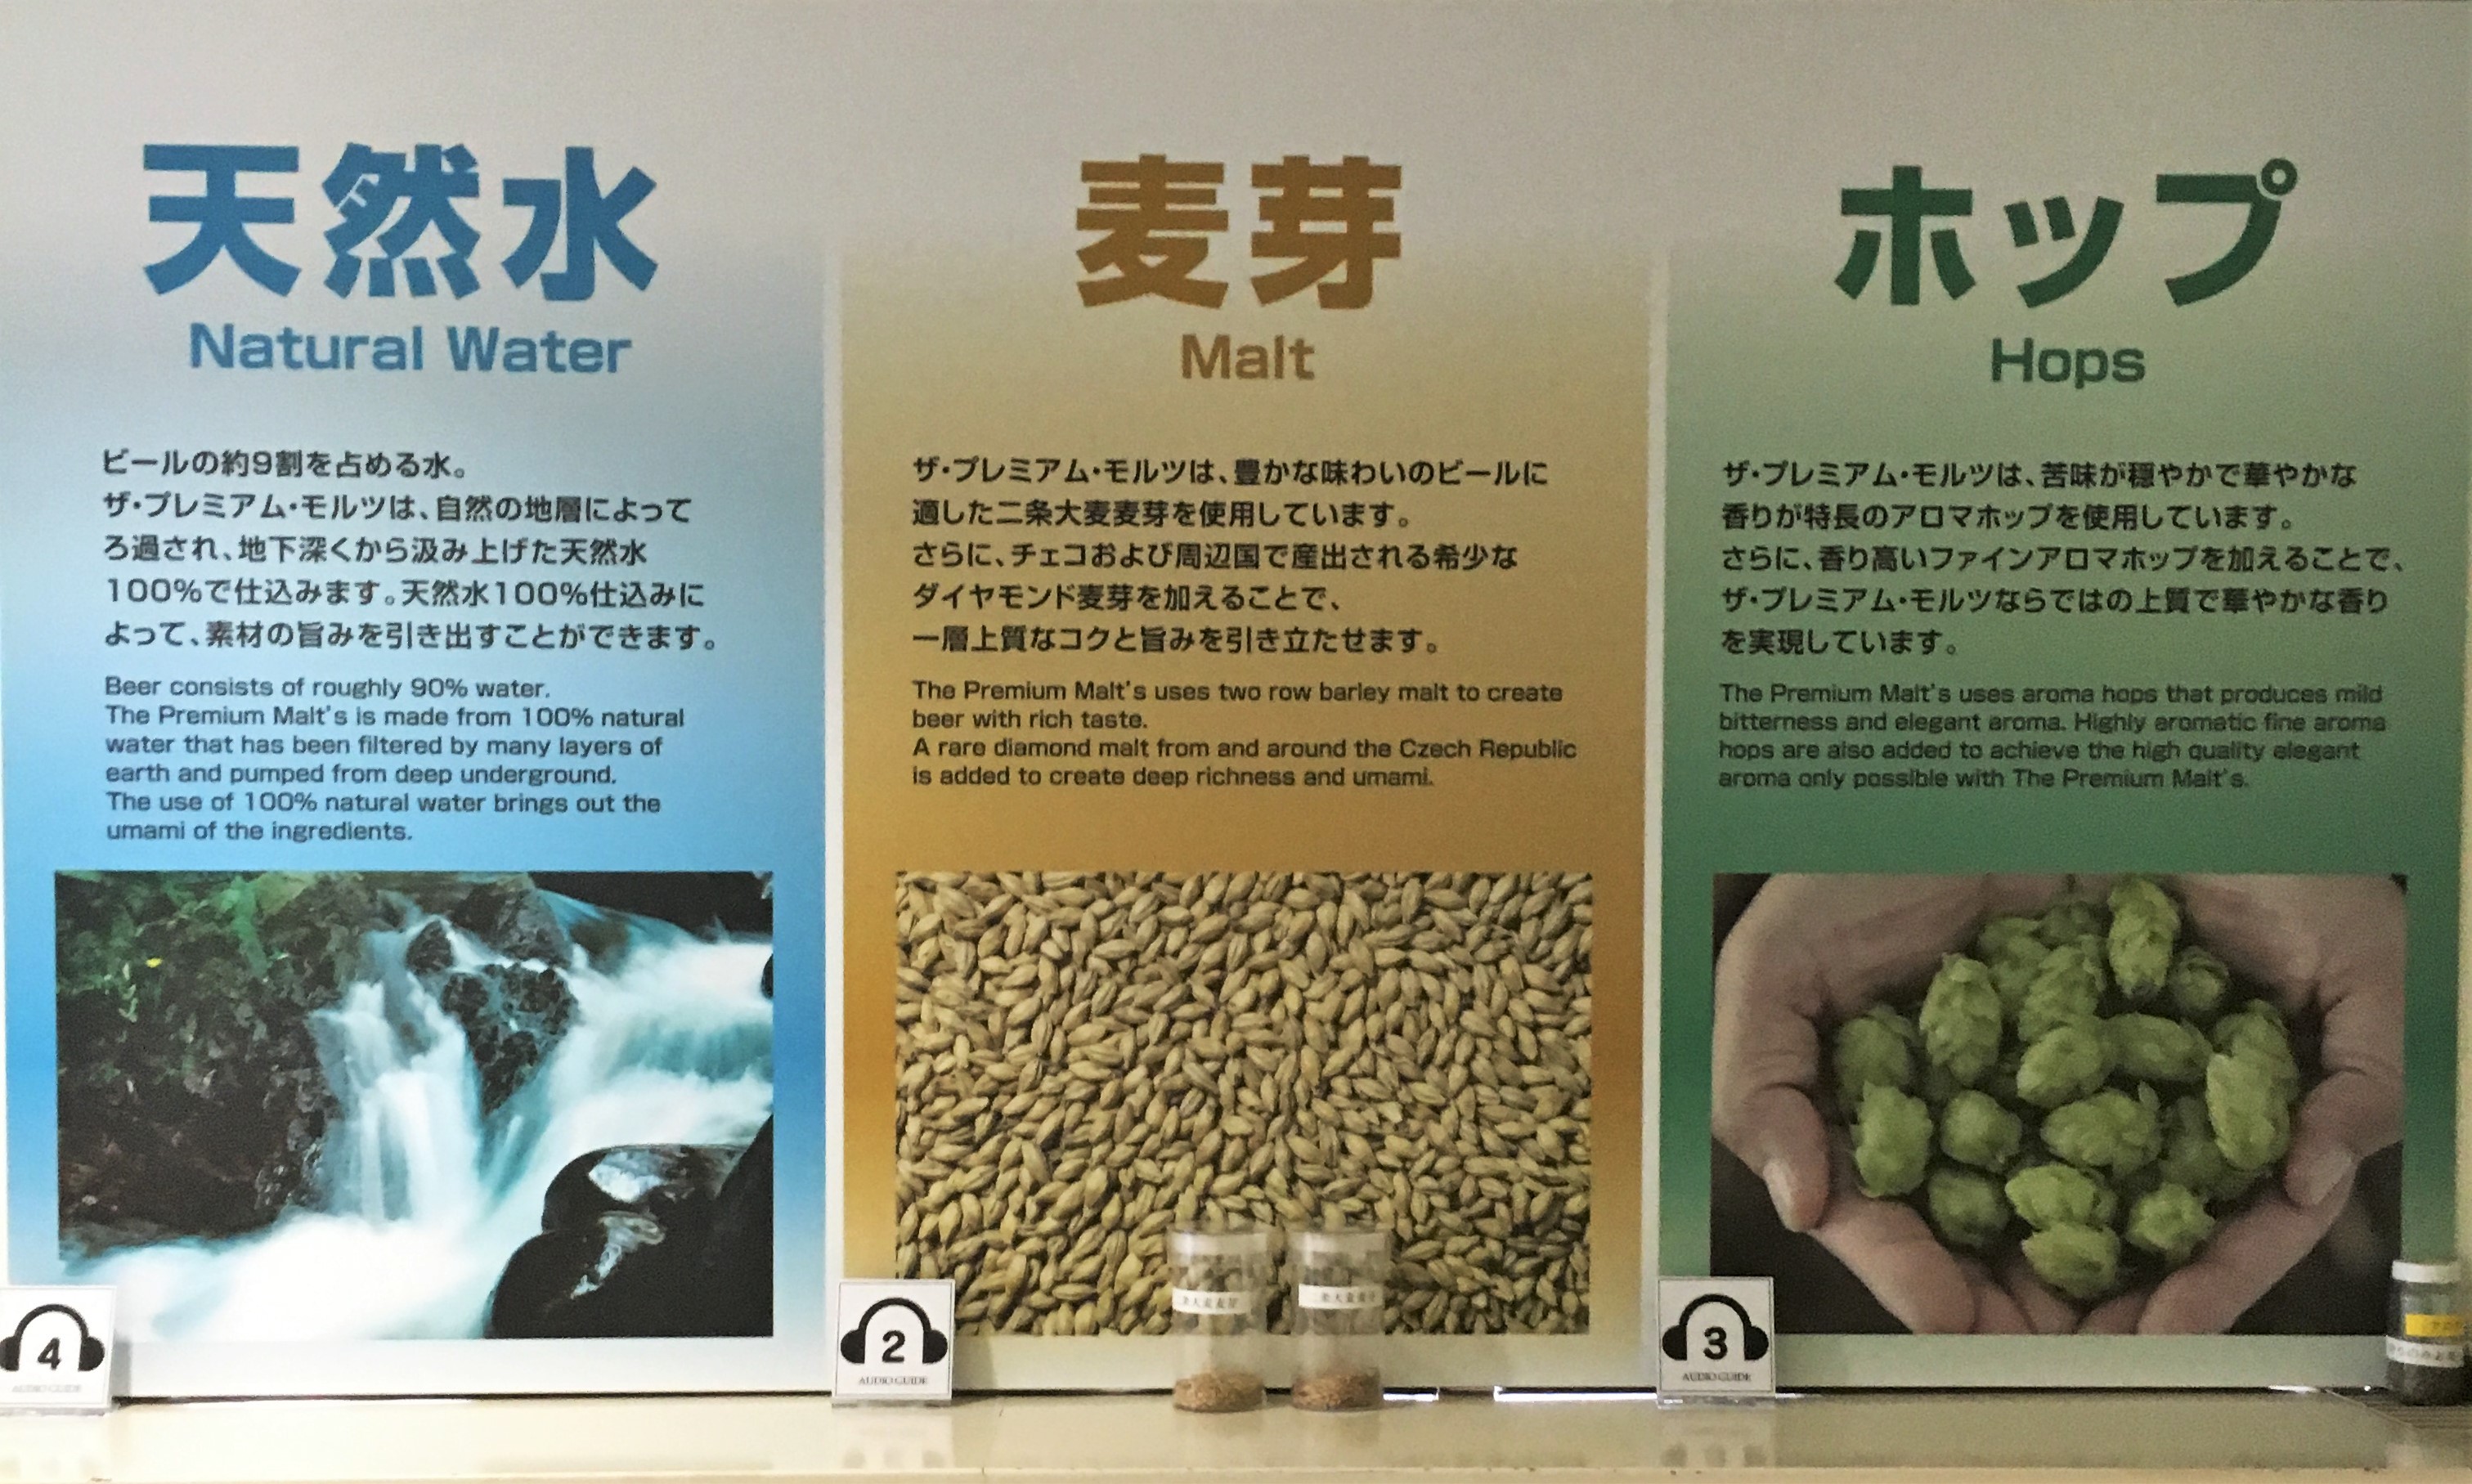 Board discussing the key elements of the Premium Malts beer at the Suntory Kyoto beer factory